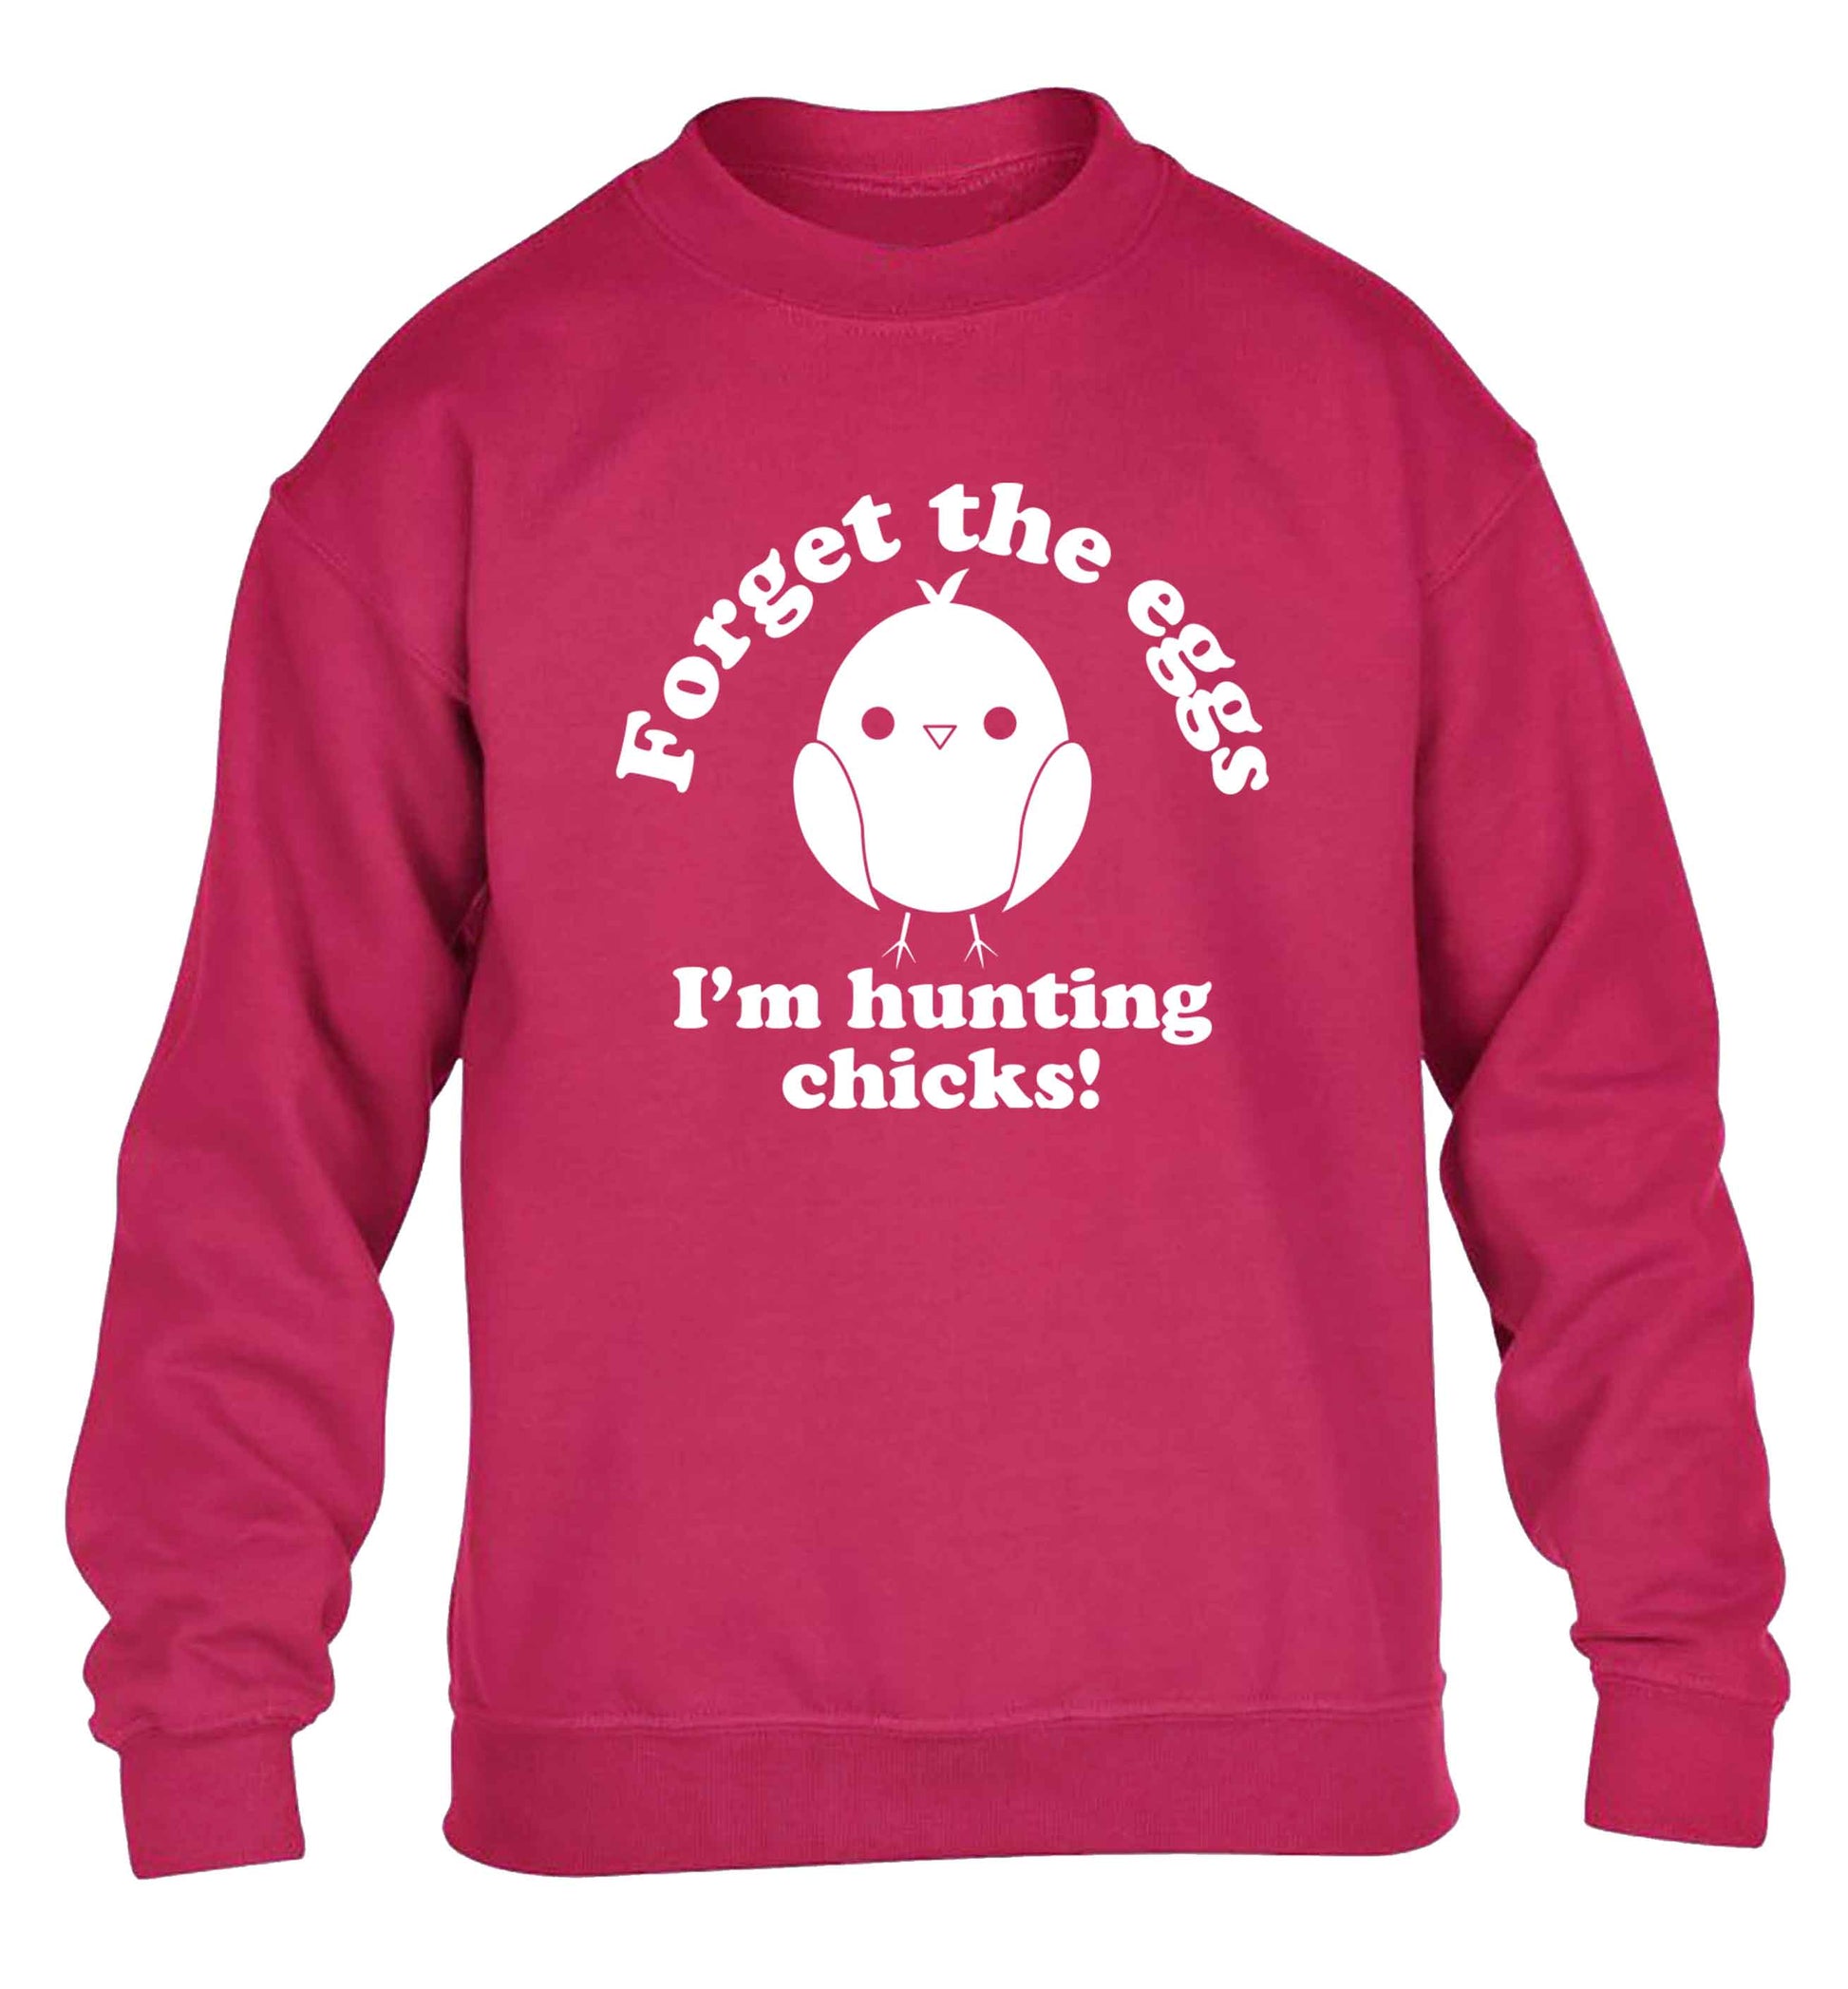 Forget the eggs I'm hunting chicks! children's pink sweater 12-13 Years